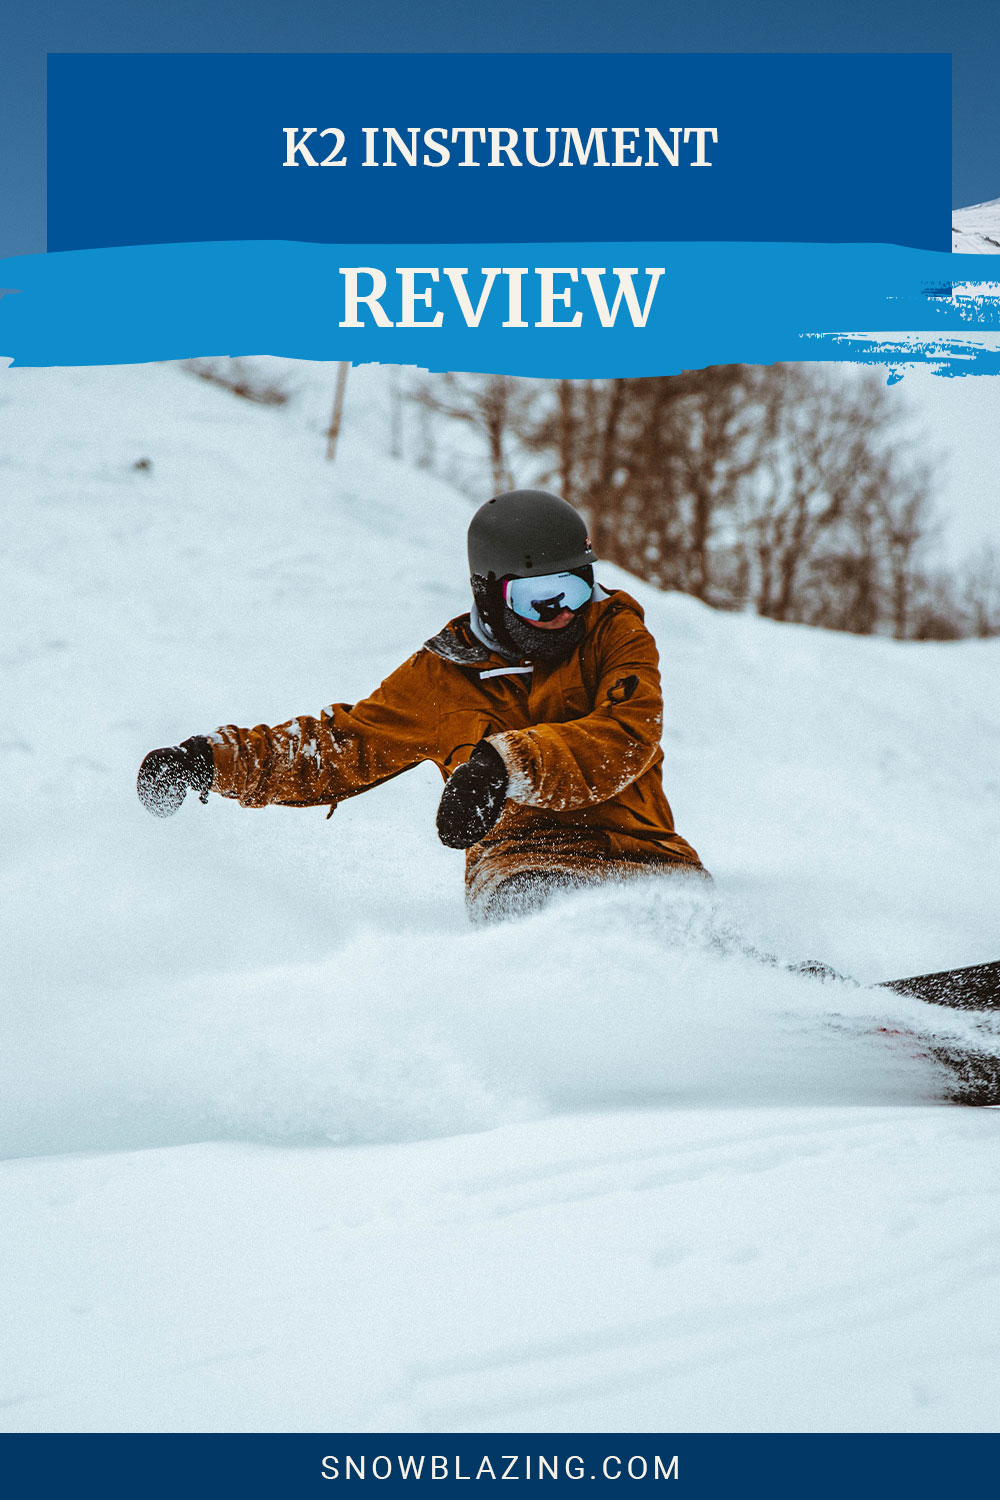 Person in a brown jacket snowboarding - K2 Instrument Review